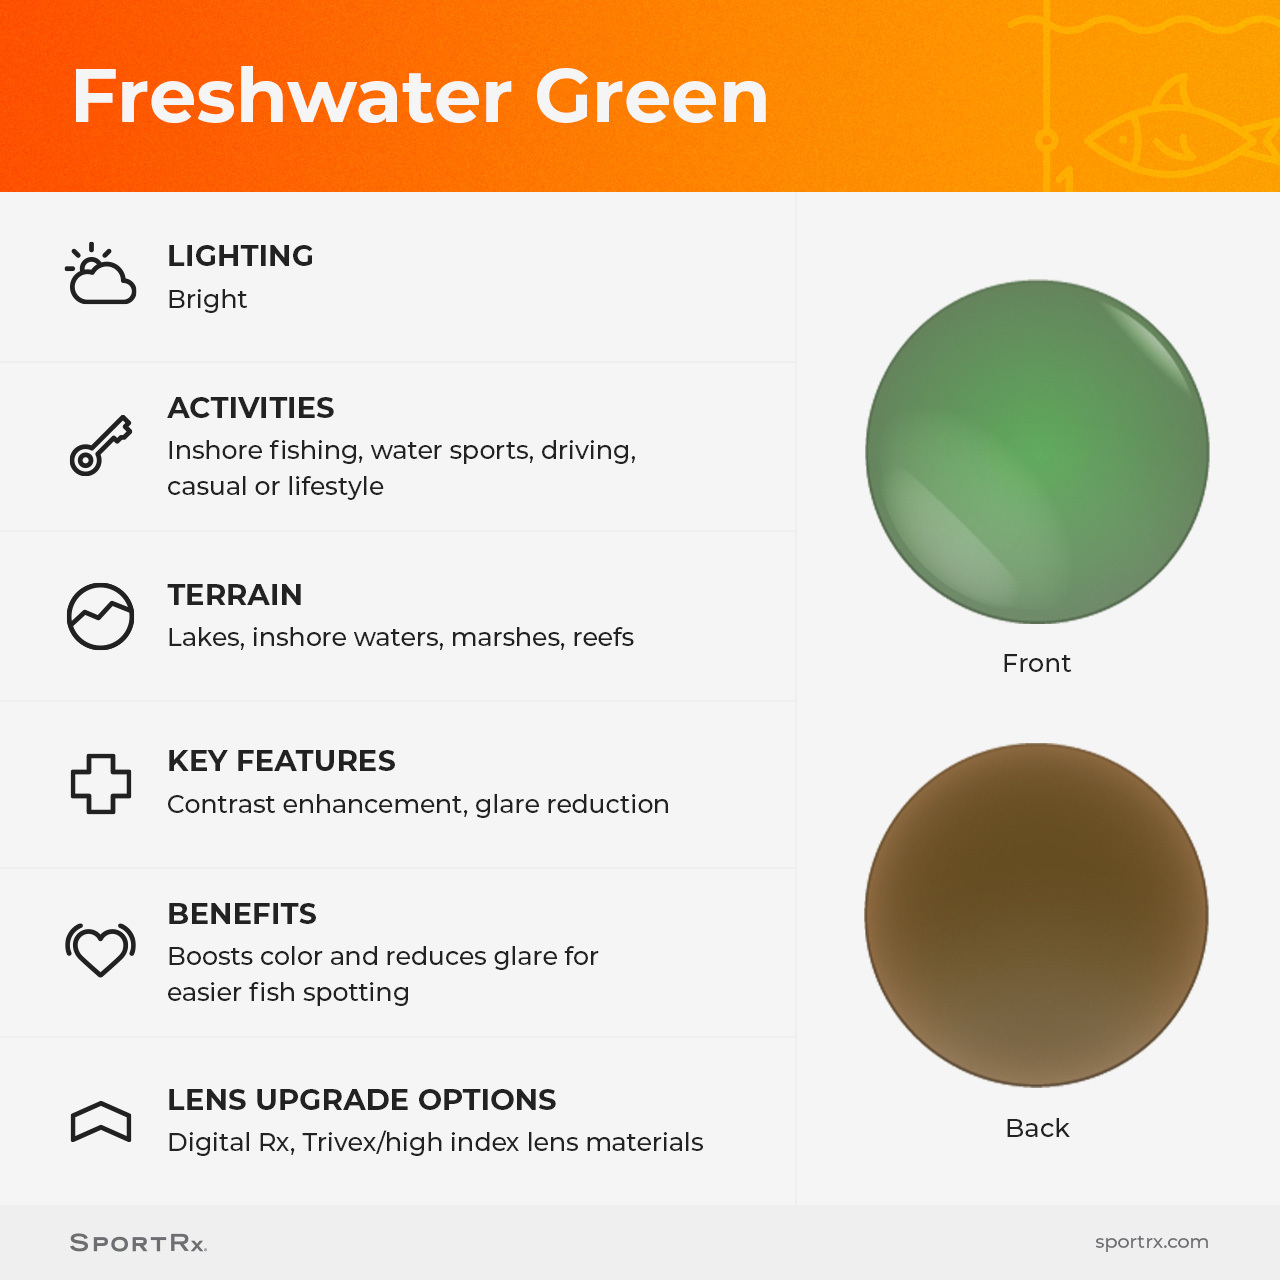 Freshwater Green Sport Optimized Lens Features